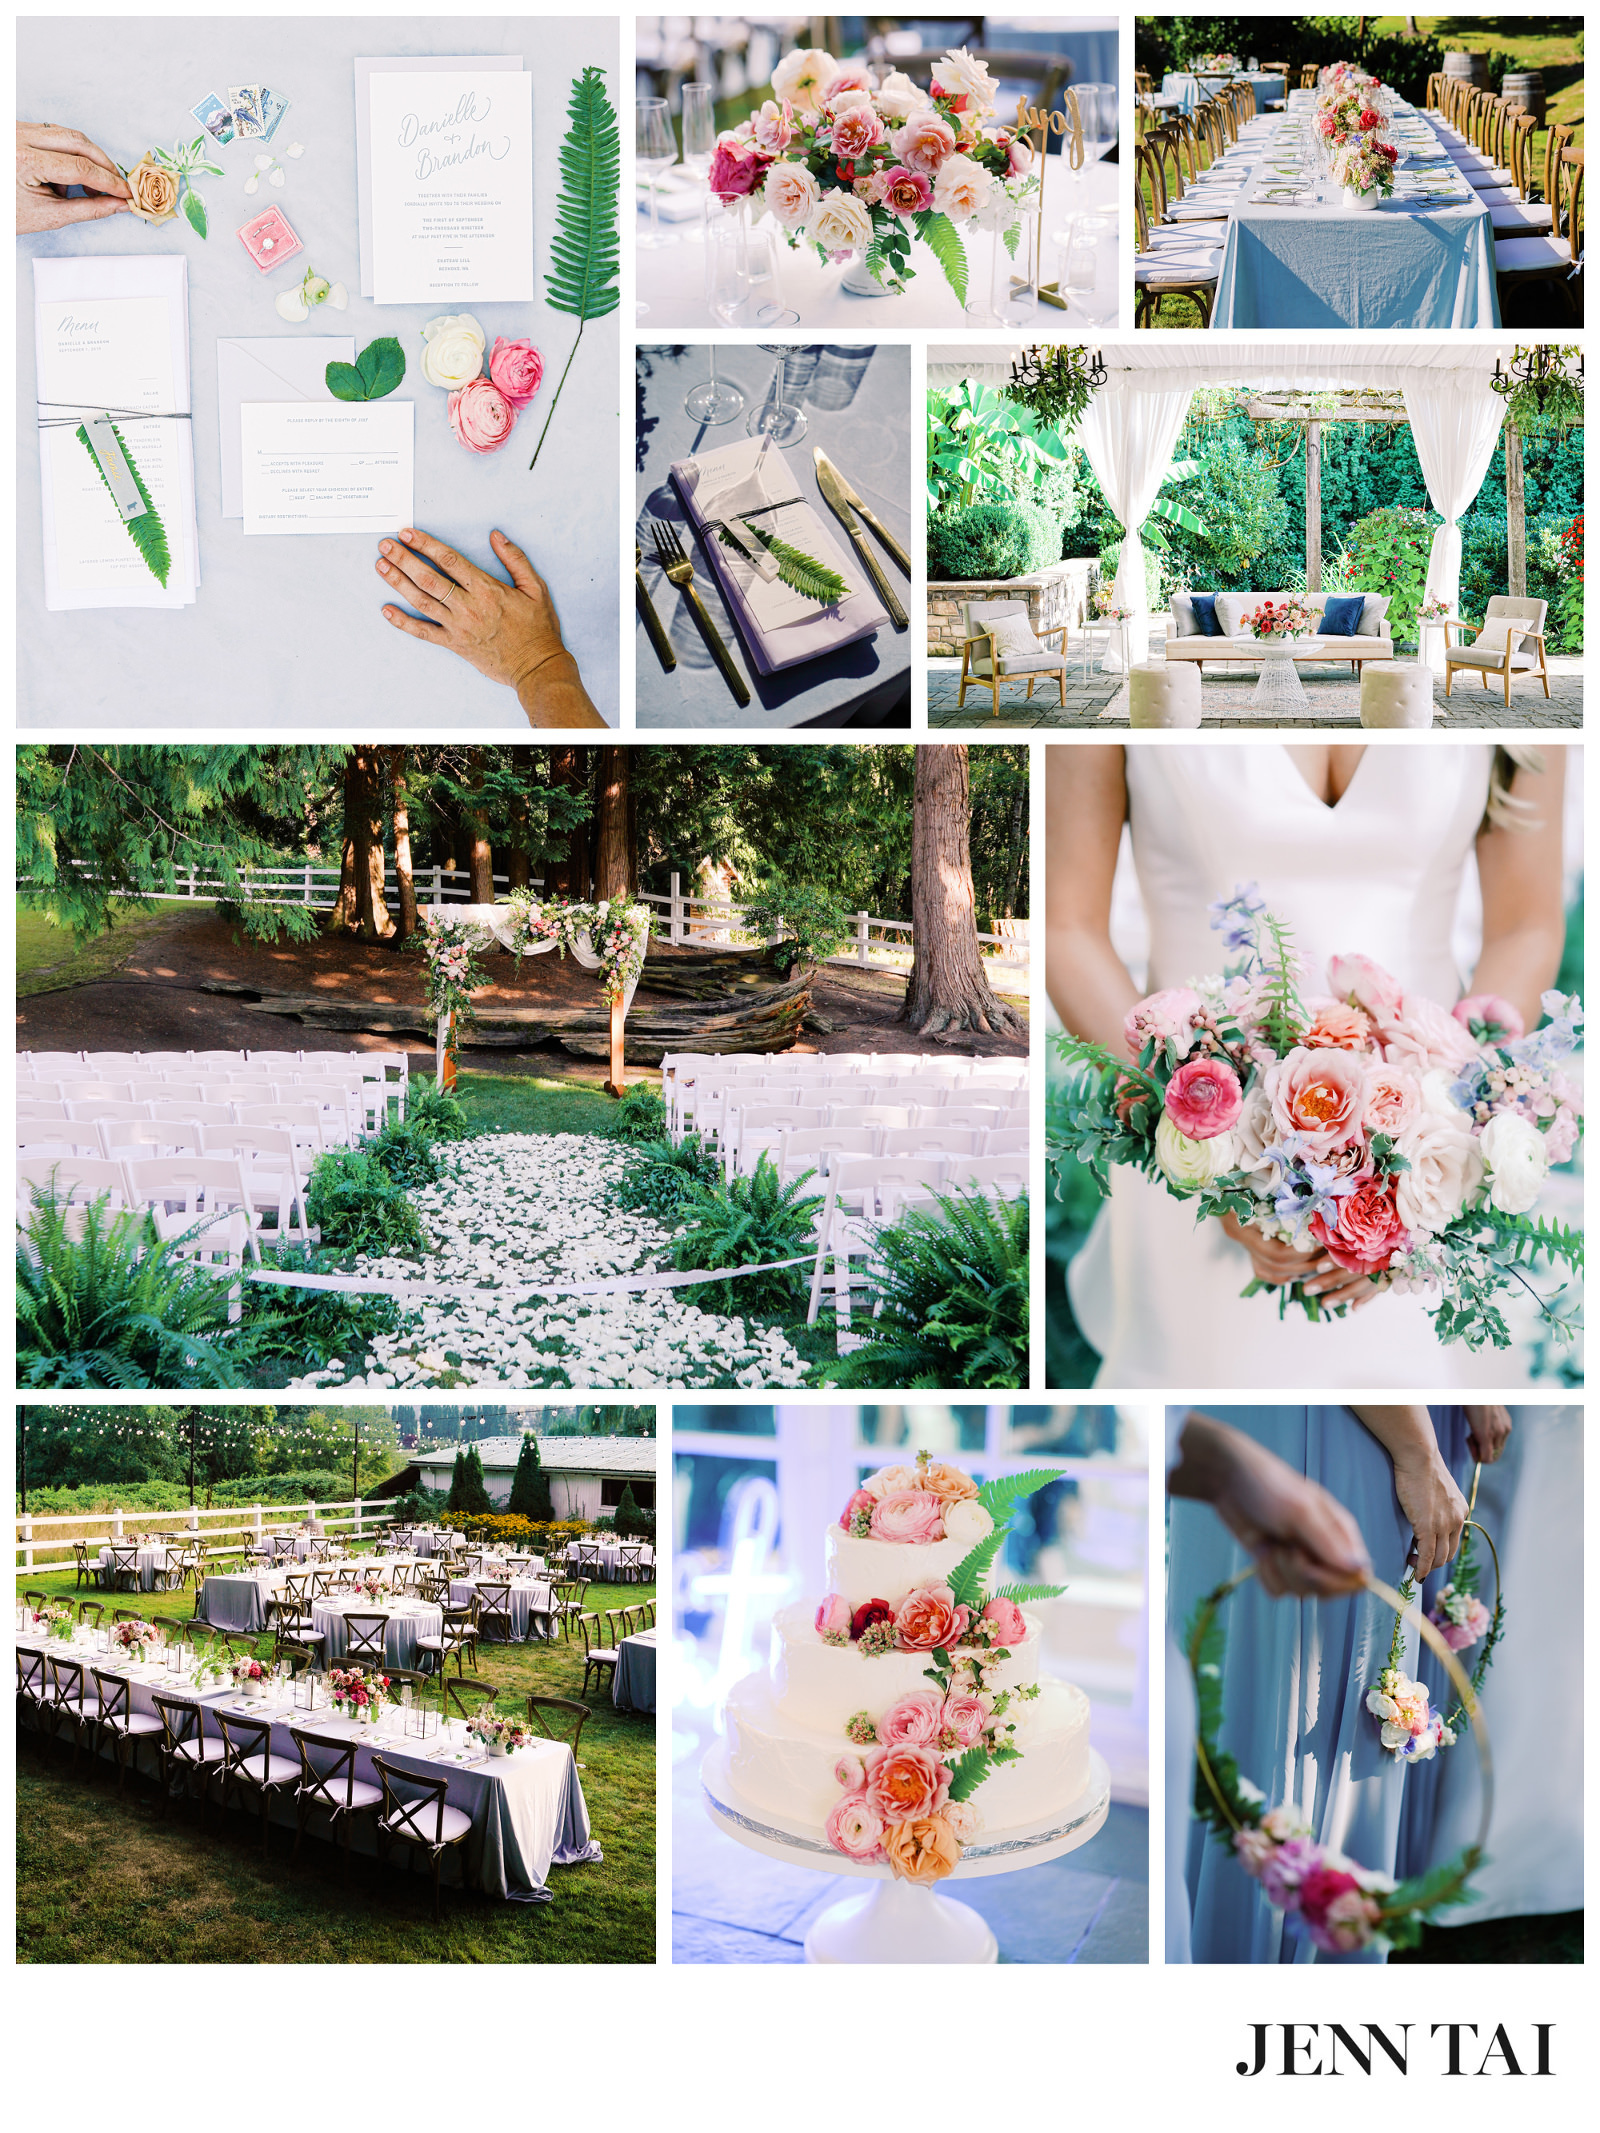 Inspiration for your Wedding: Decor and Details